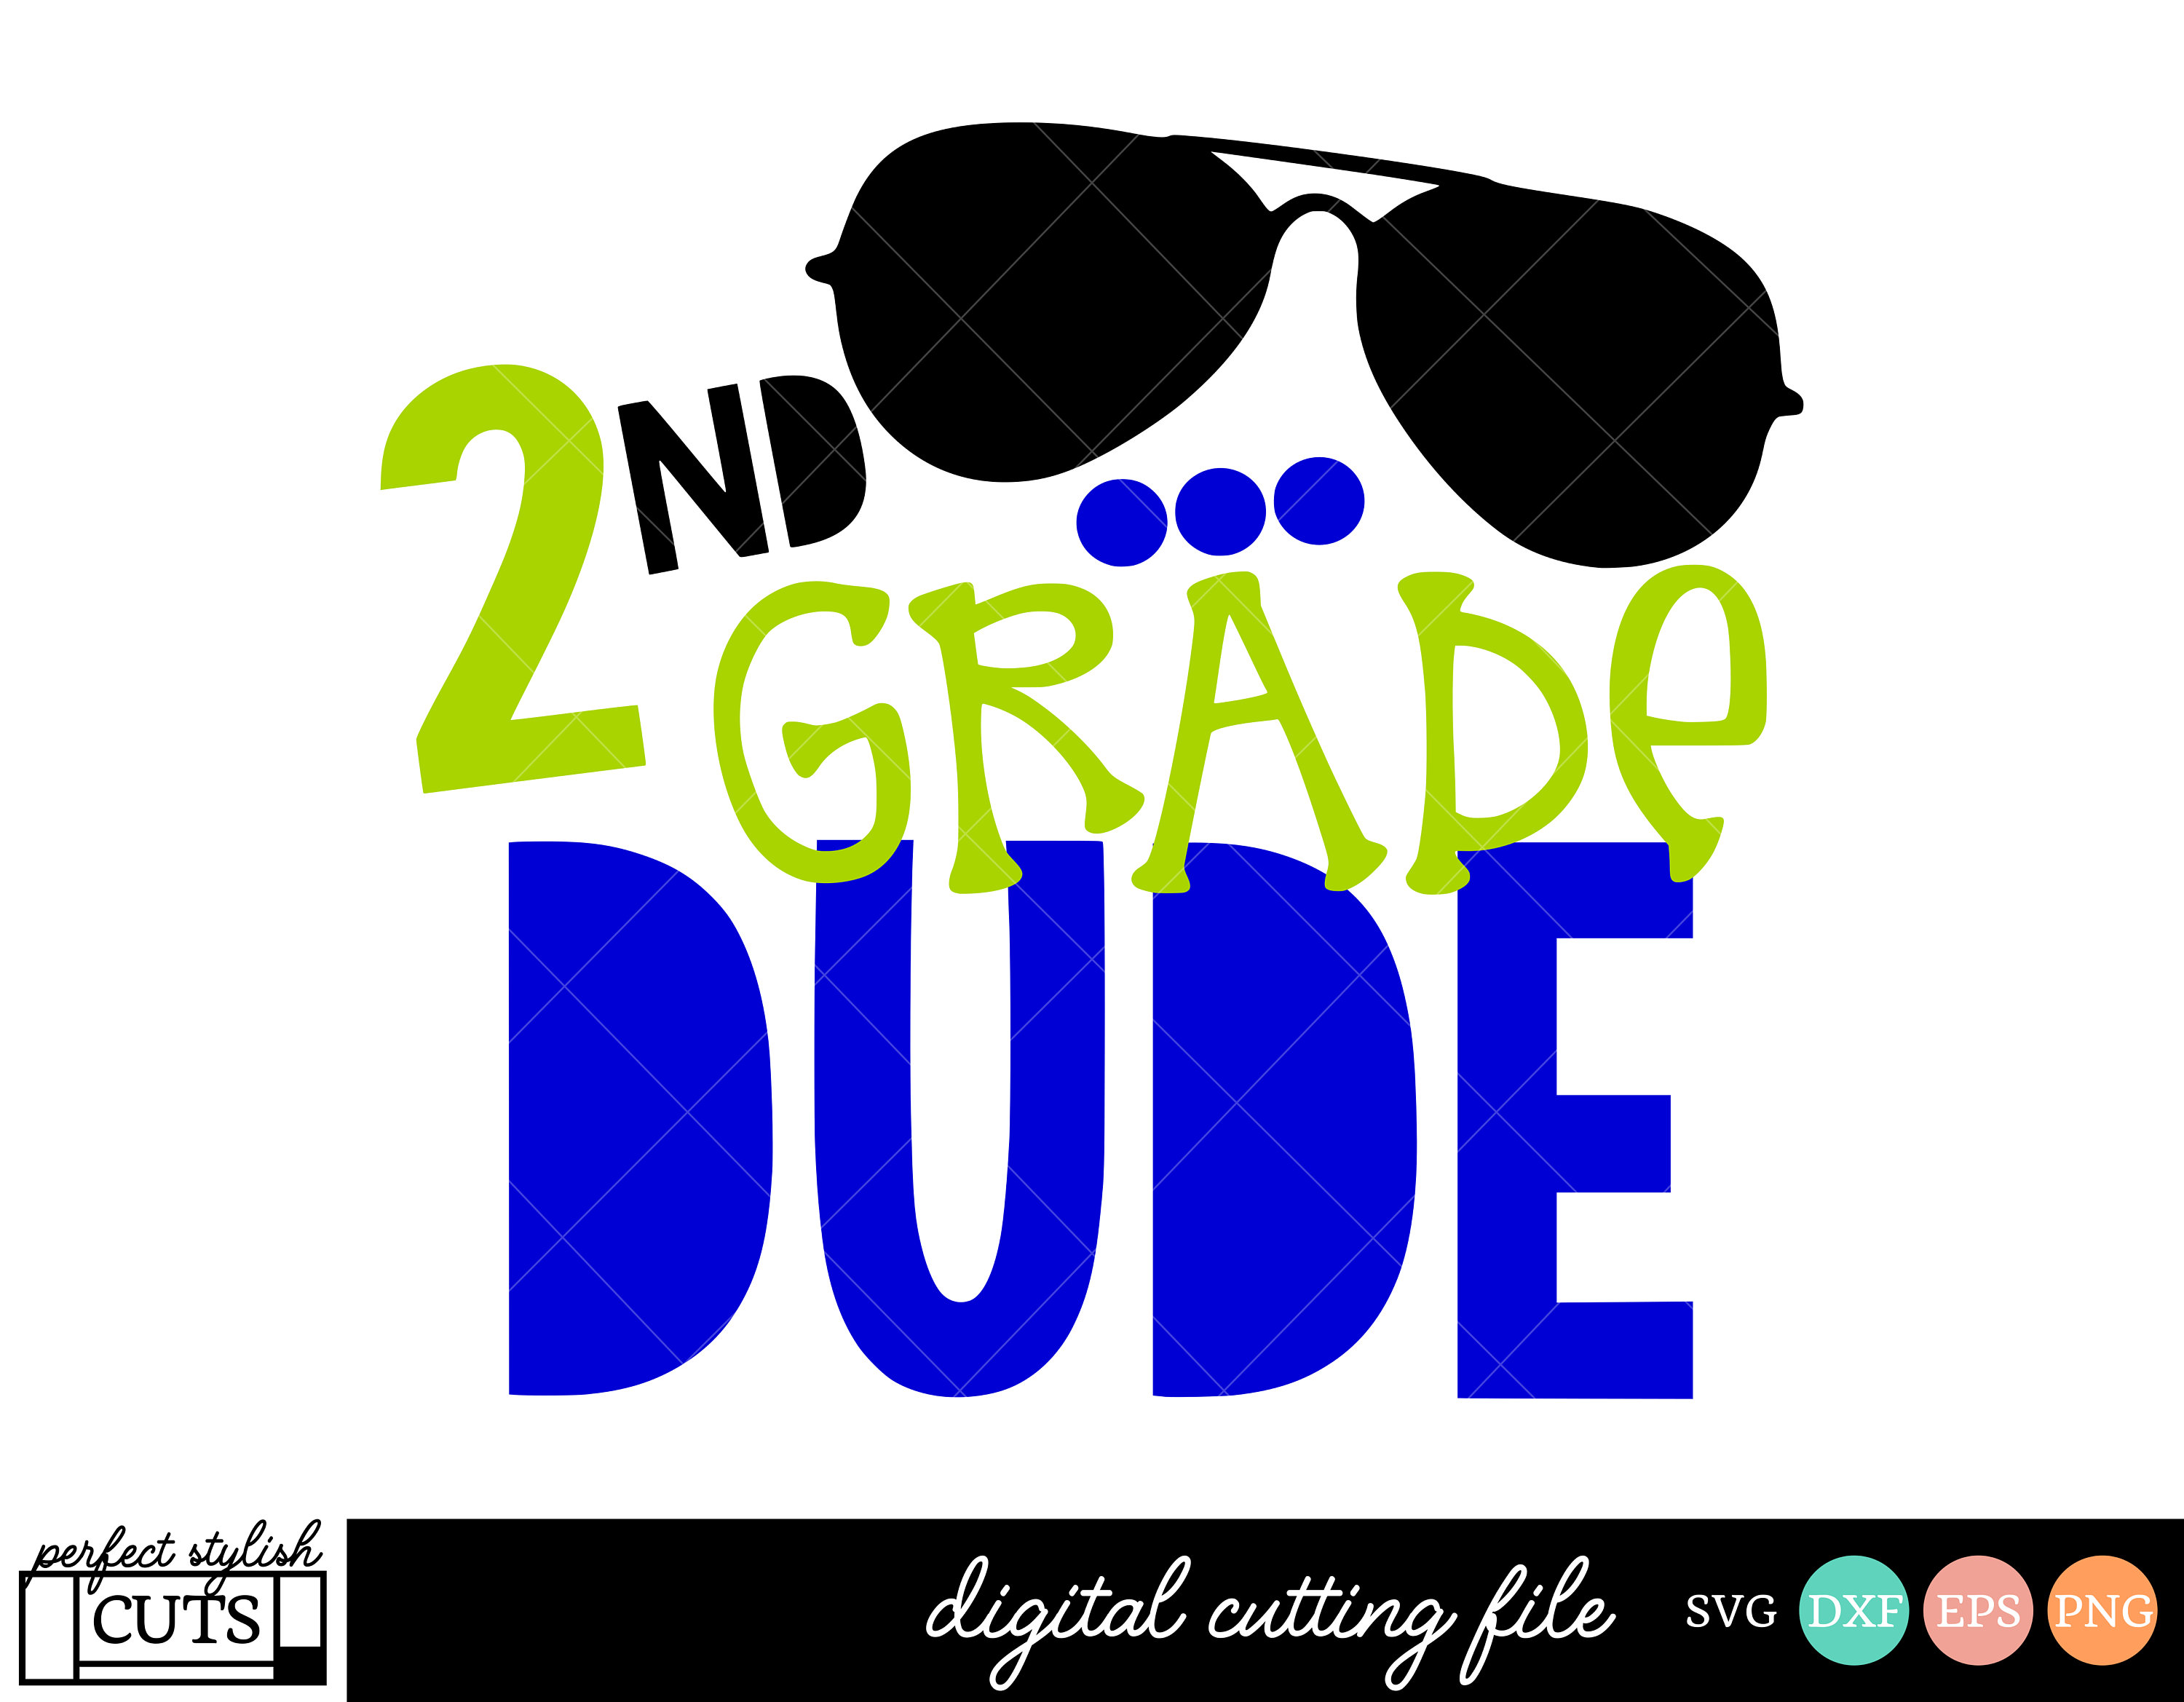 2nd Grader Reporting Duty Cuttable Design SVG PNG DXF /& eps Designs Cricut Cameo File Silhouette